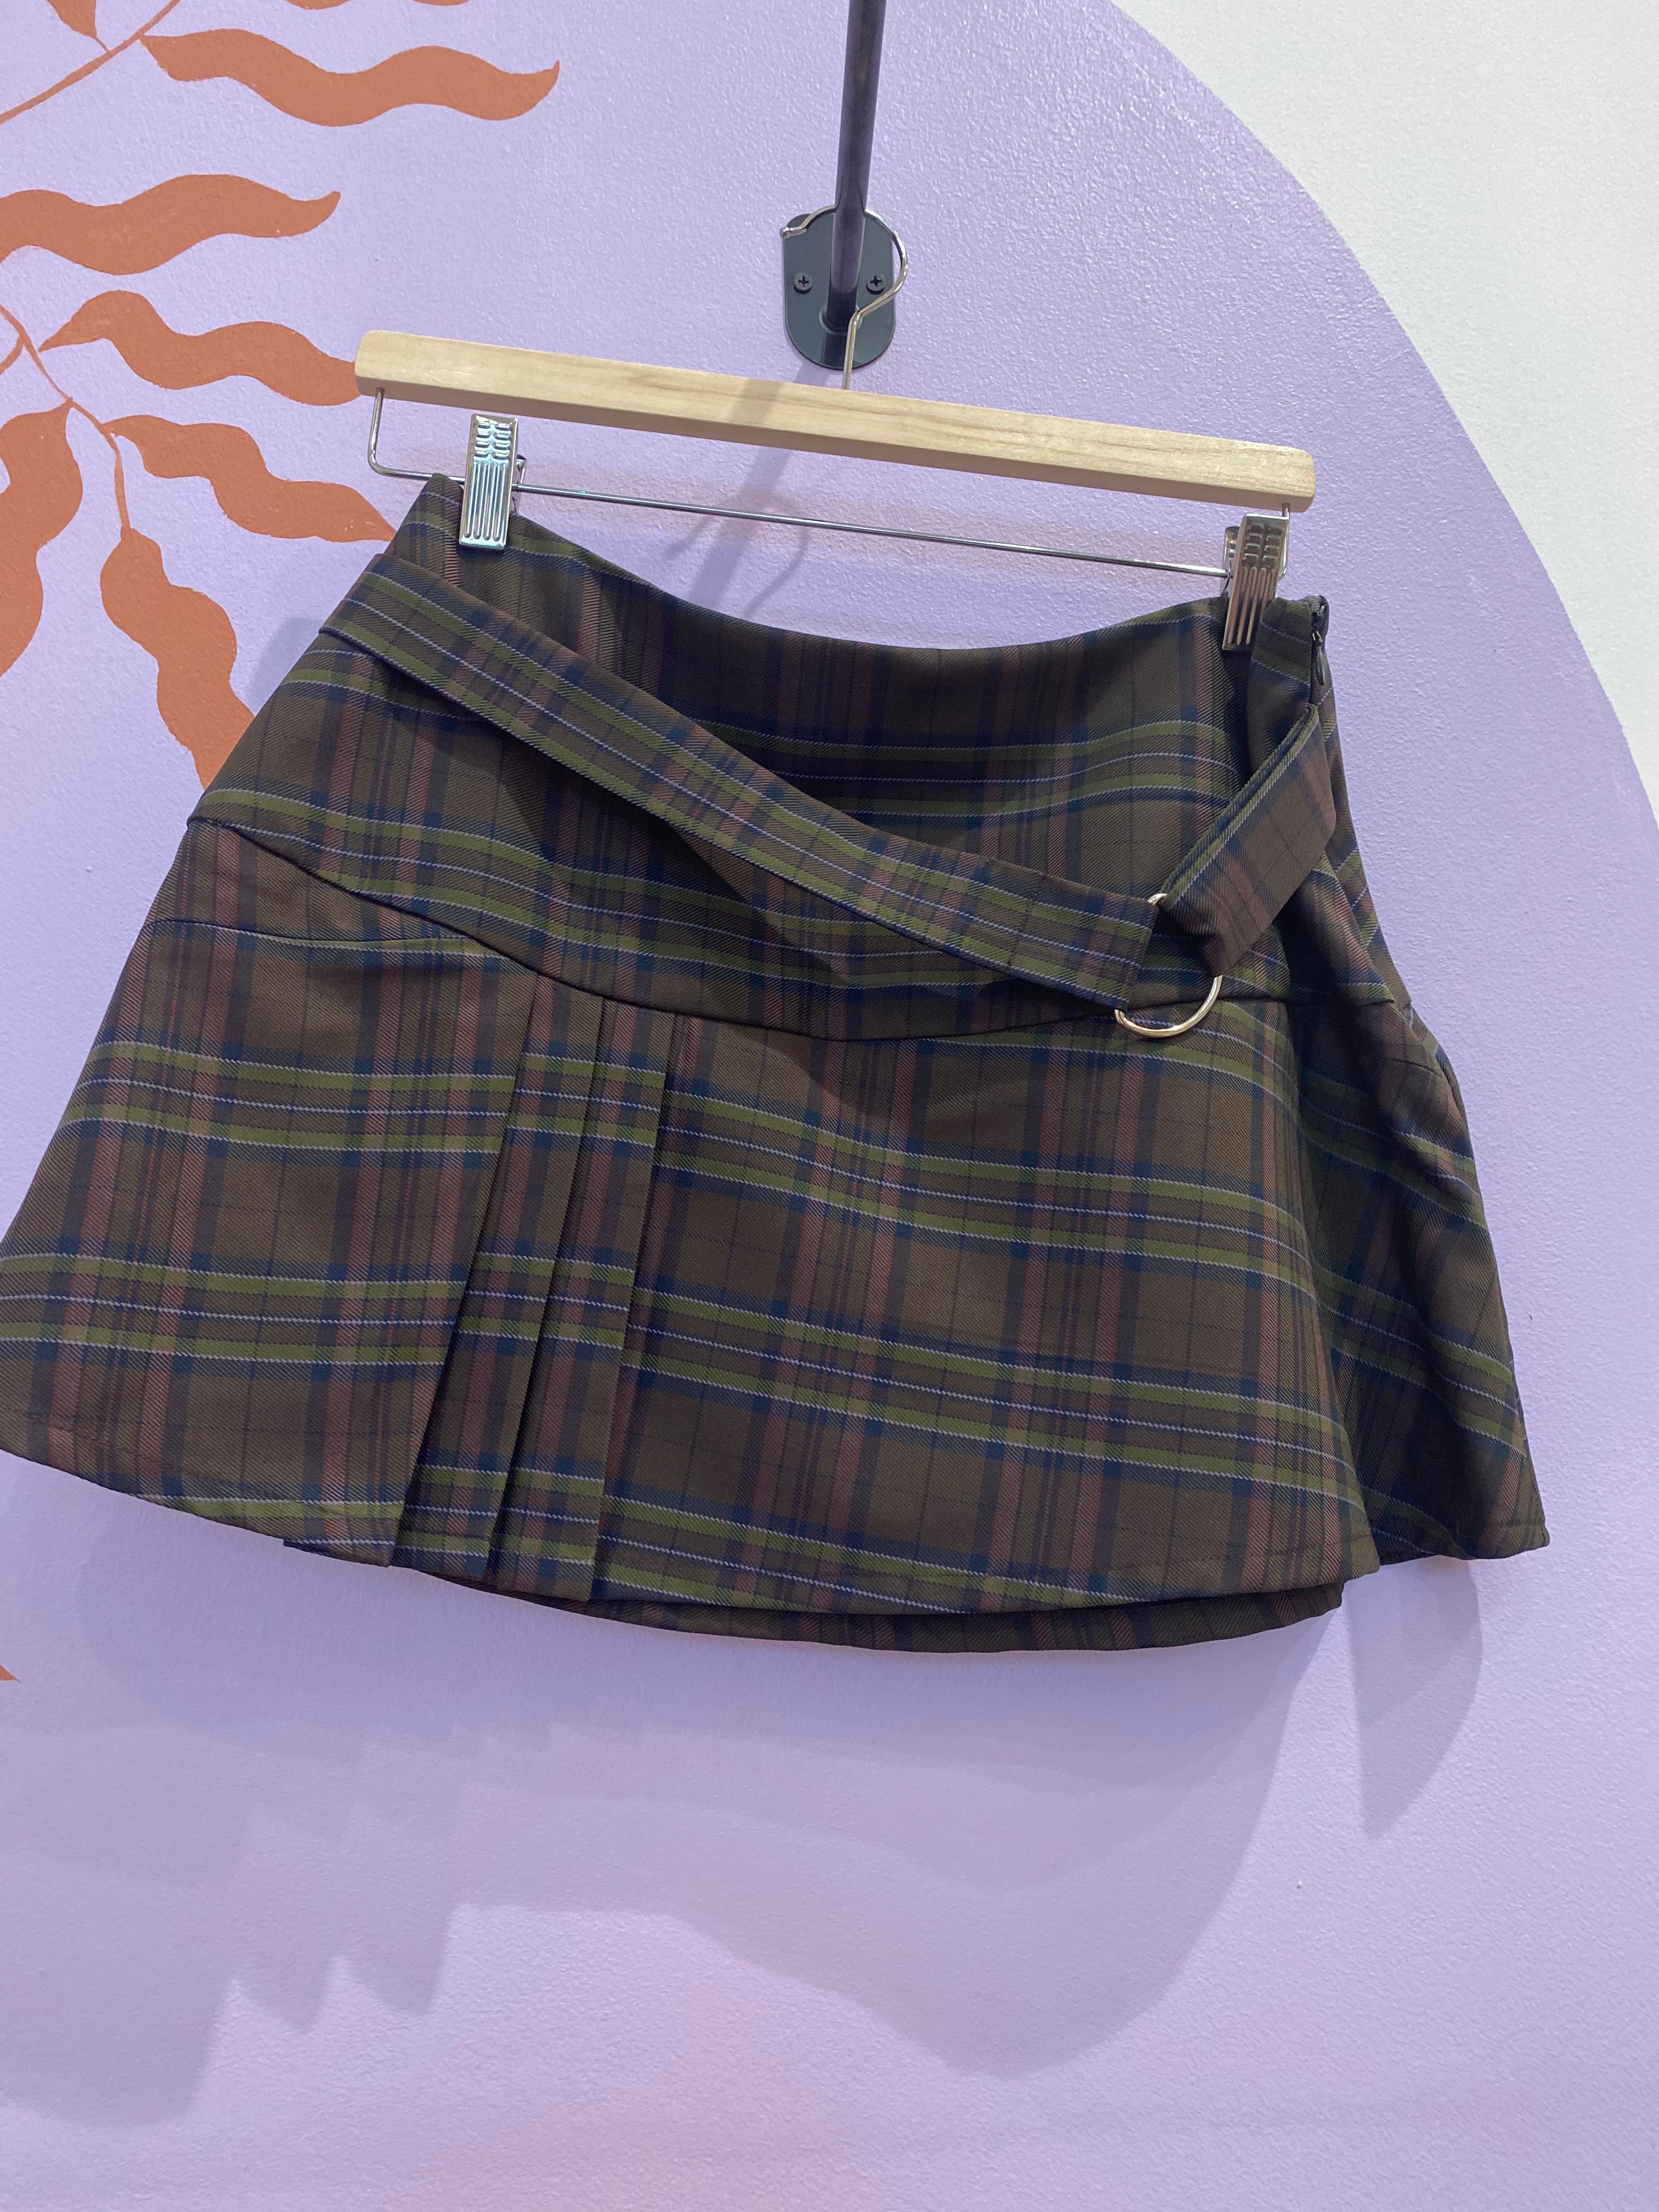 Florence pleated skirt green and purple checks